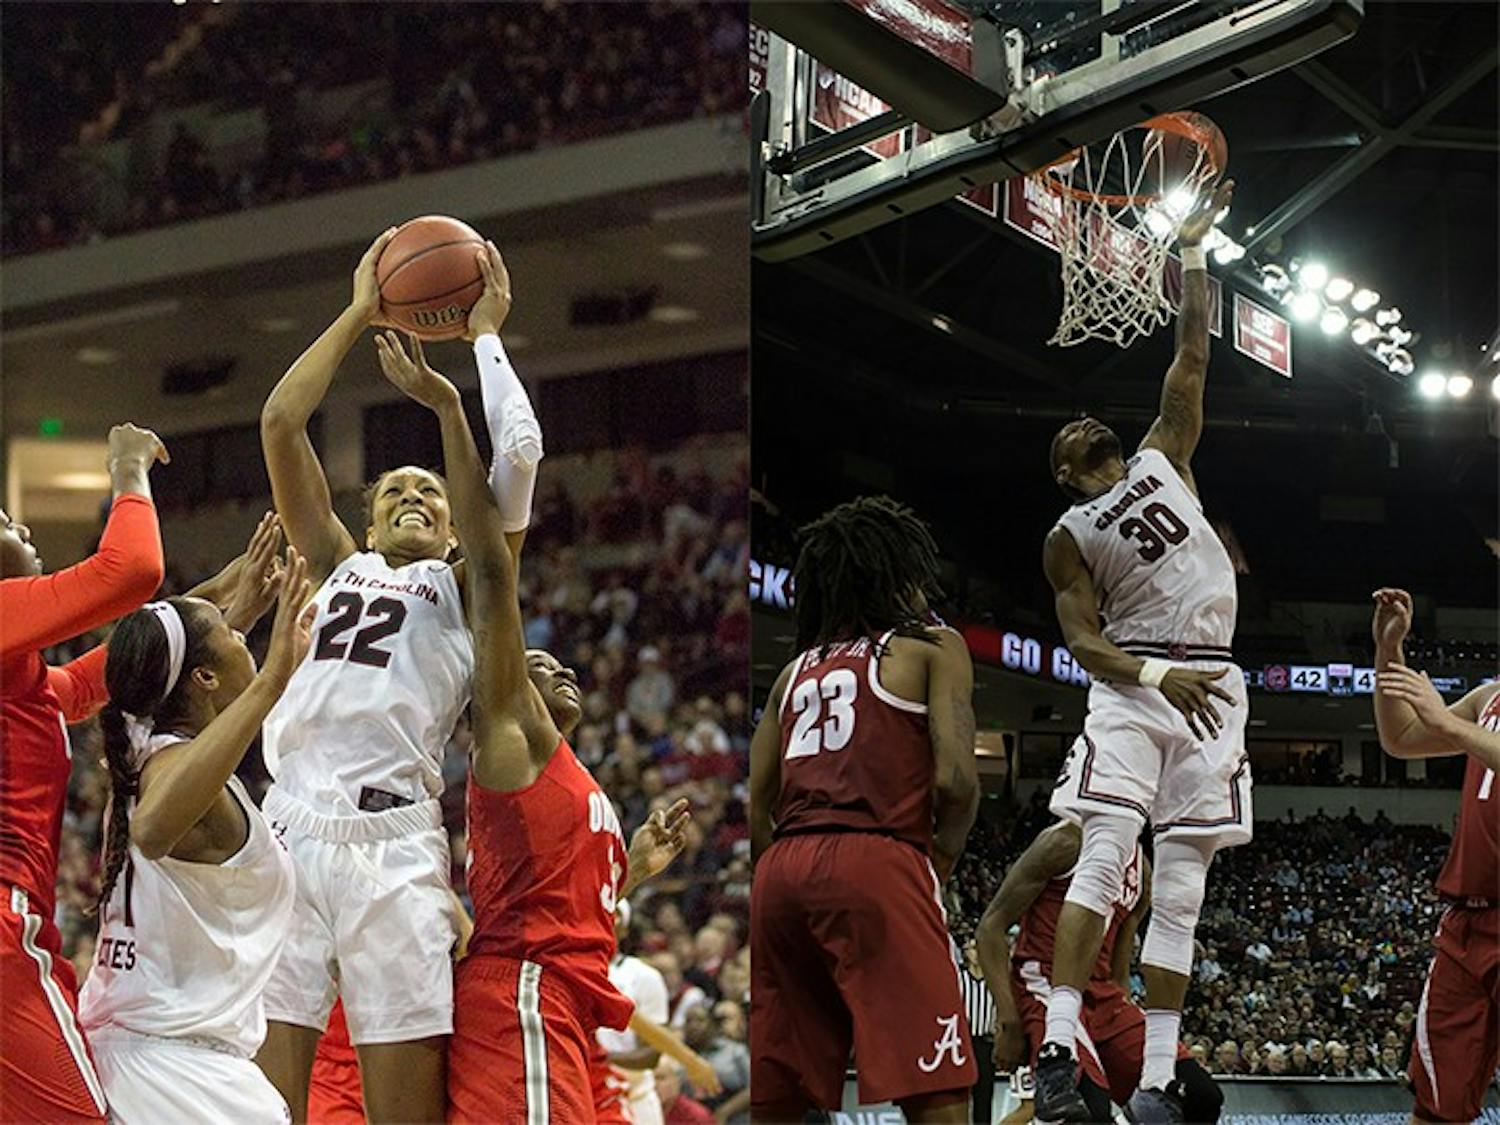 (Left) A'ja Wilson drives for a layup. (Right) Chris Silva jumps for a ball in a game against Alabama. Both players have made it to their leagues' championship this season.